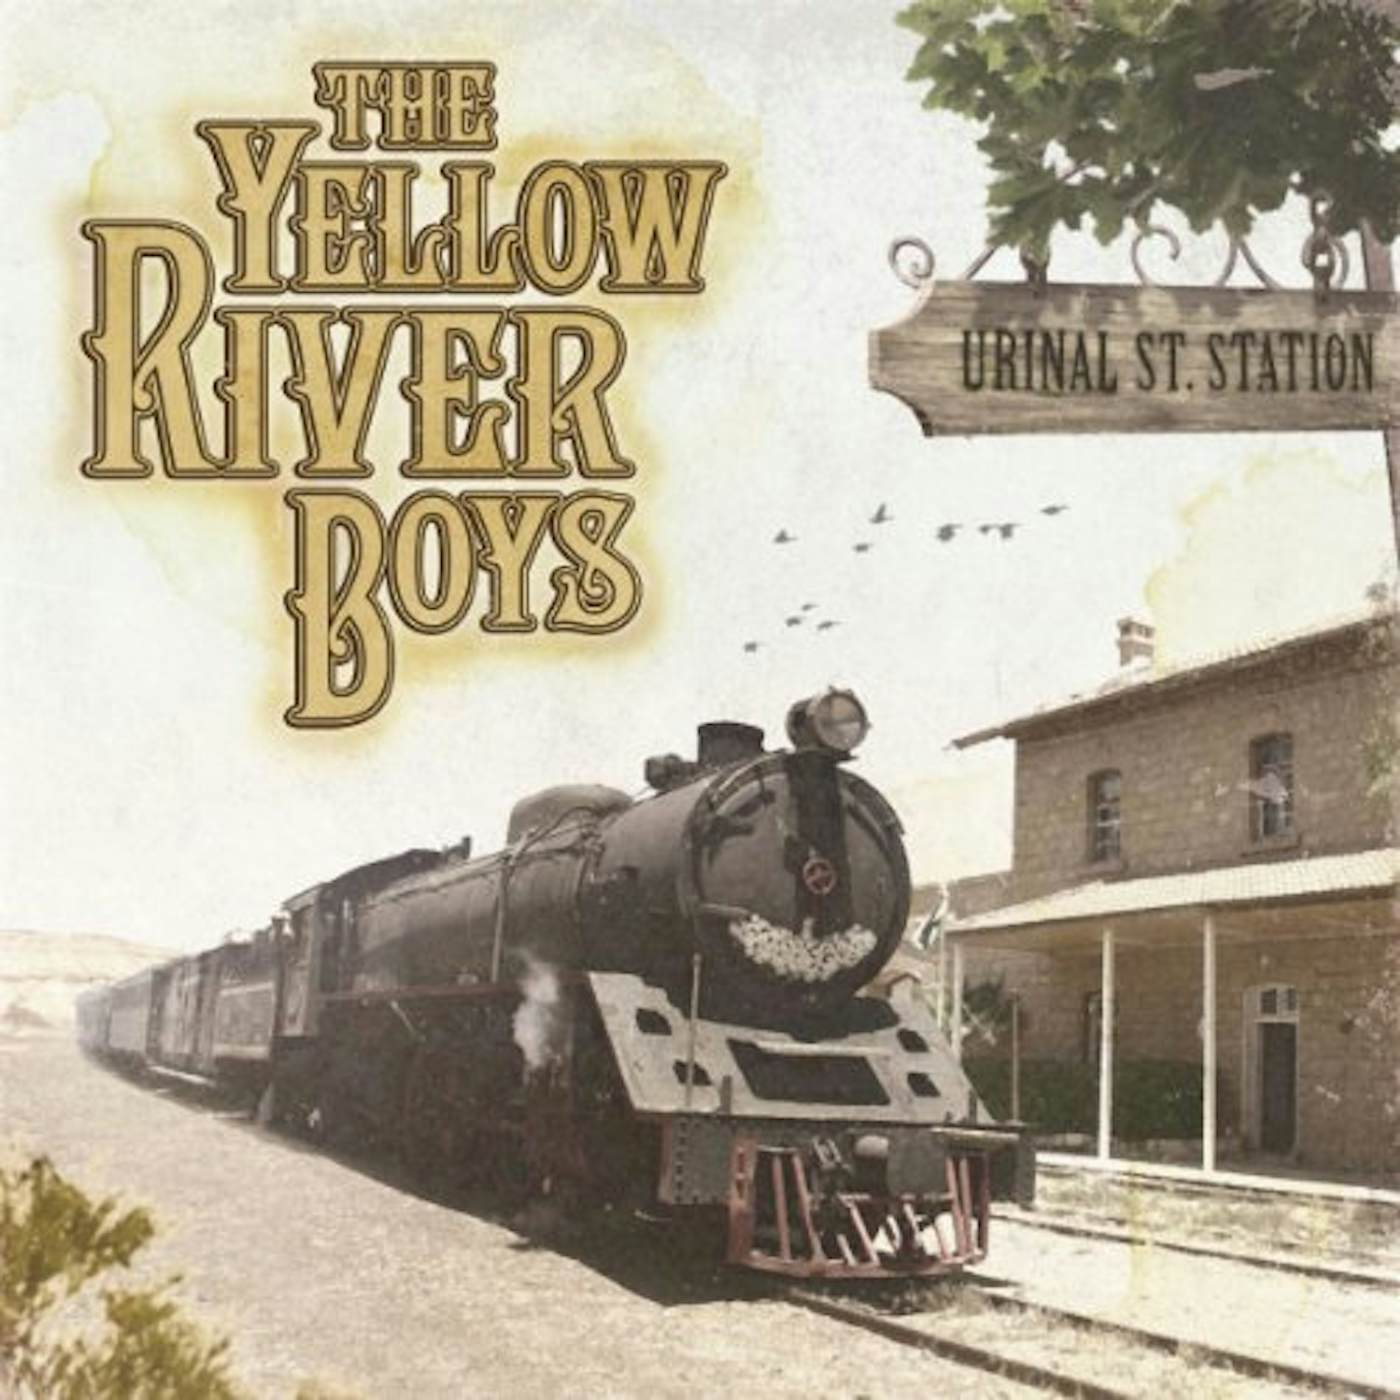 The Yellow River Boys Urinal St. Station Vinyl Record